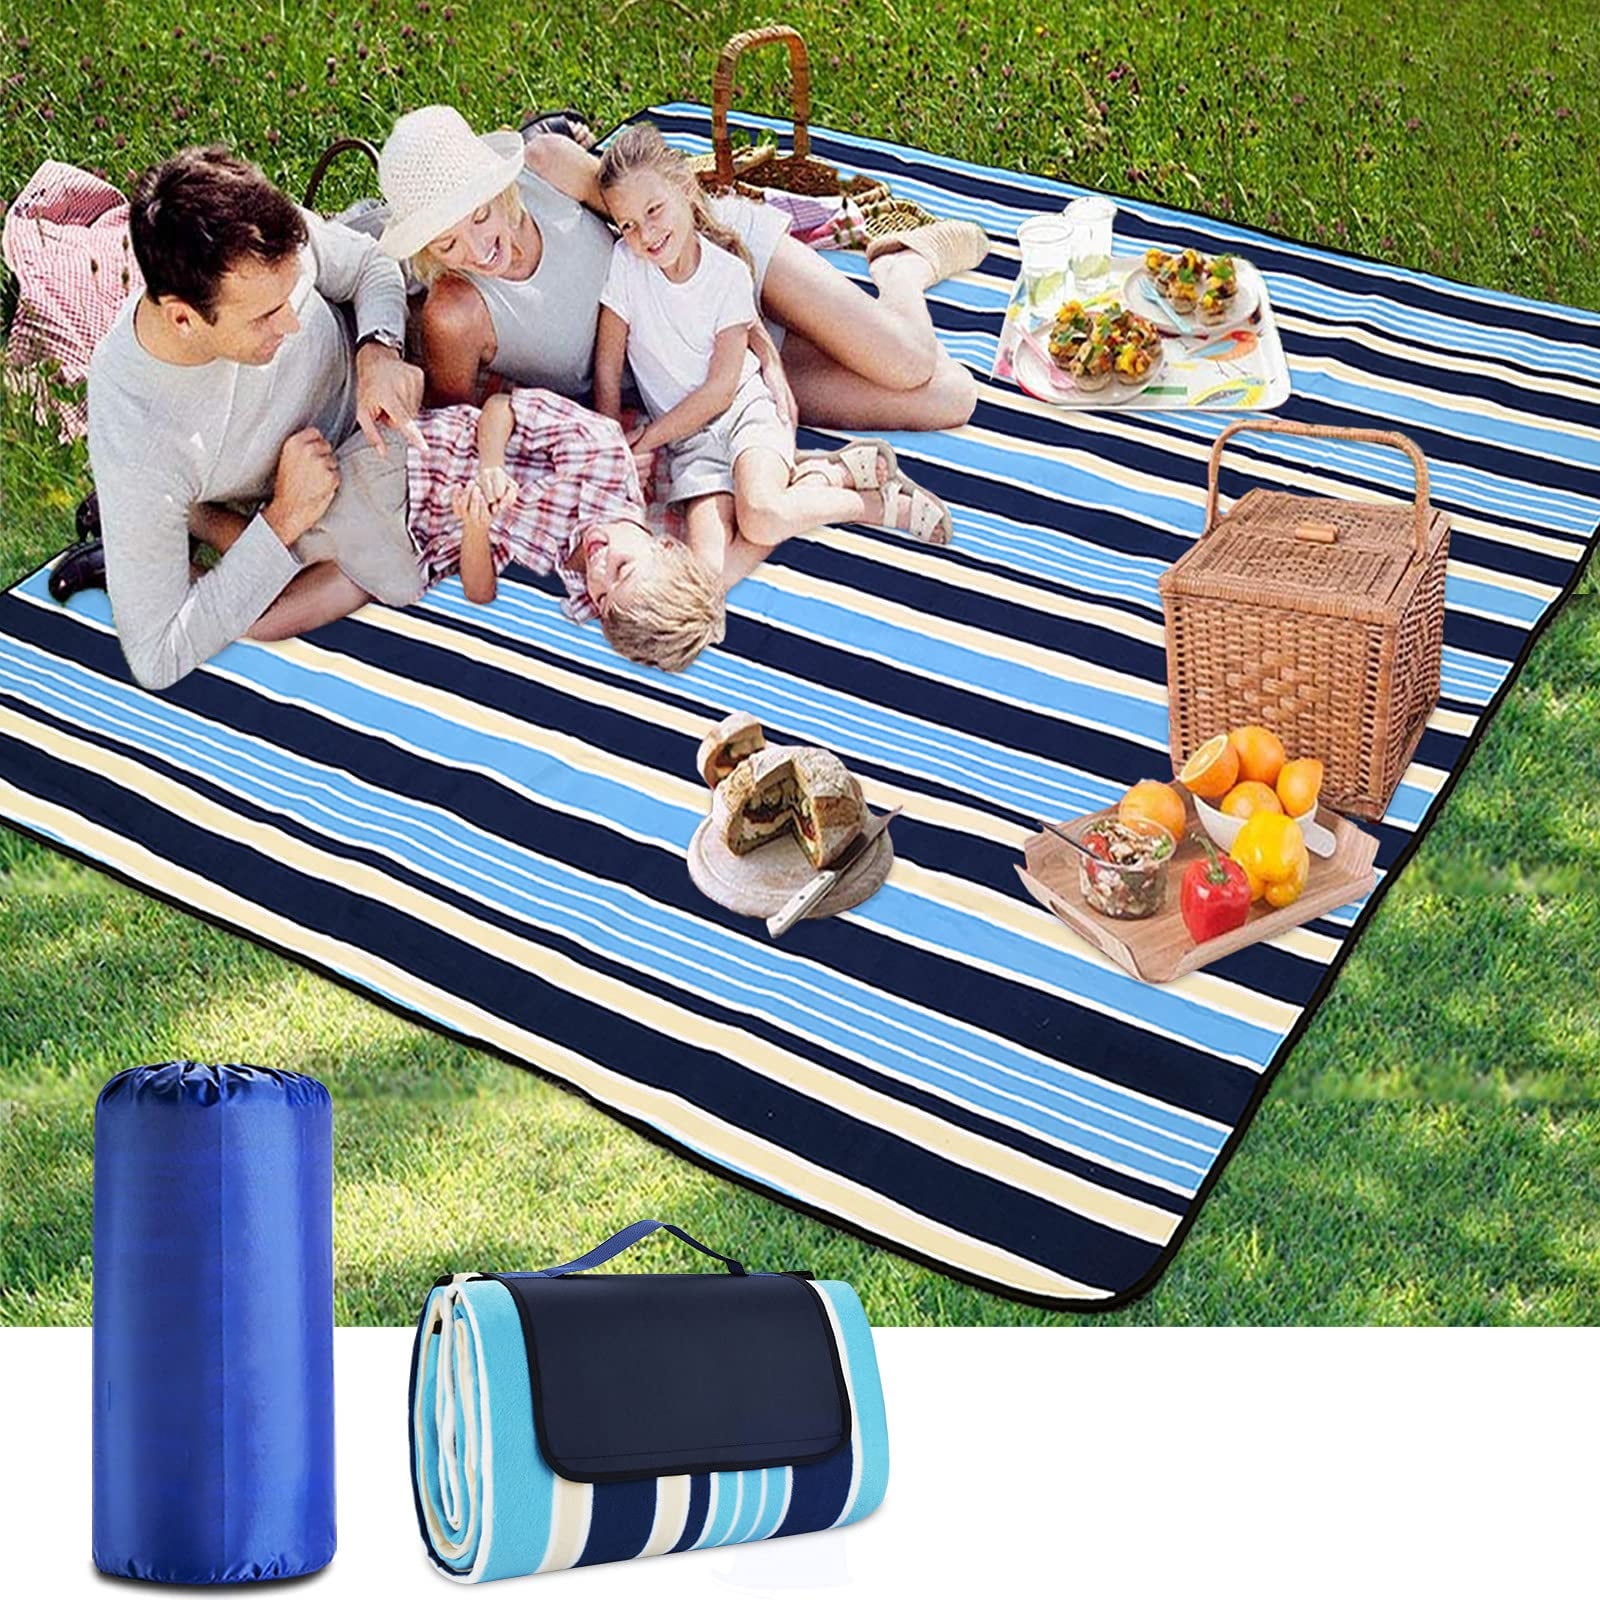 Hiking Camping Park Dark Blue & White Stripe BRIAN & DANY Picnic Blanket 200cm x 200cm Beach Foldable Outdoor Beach Blanket 3 Layers Waterproof Blanket with Carrying Handle for Family